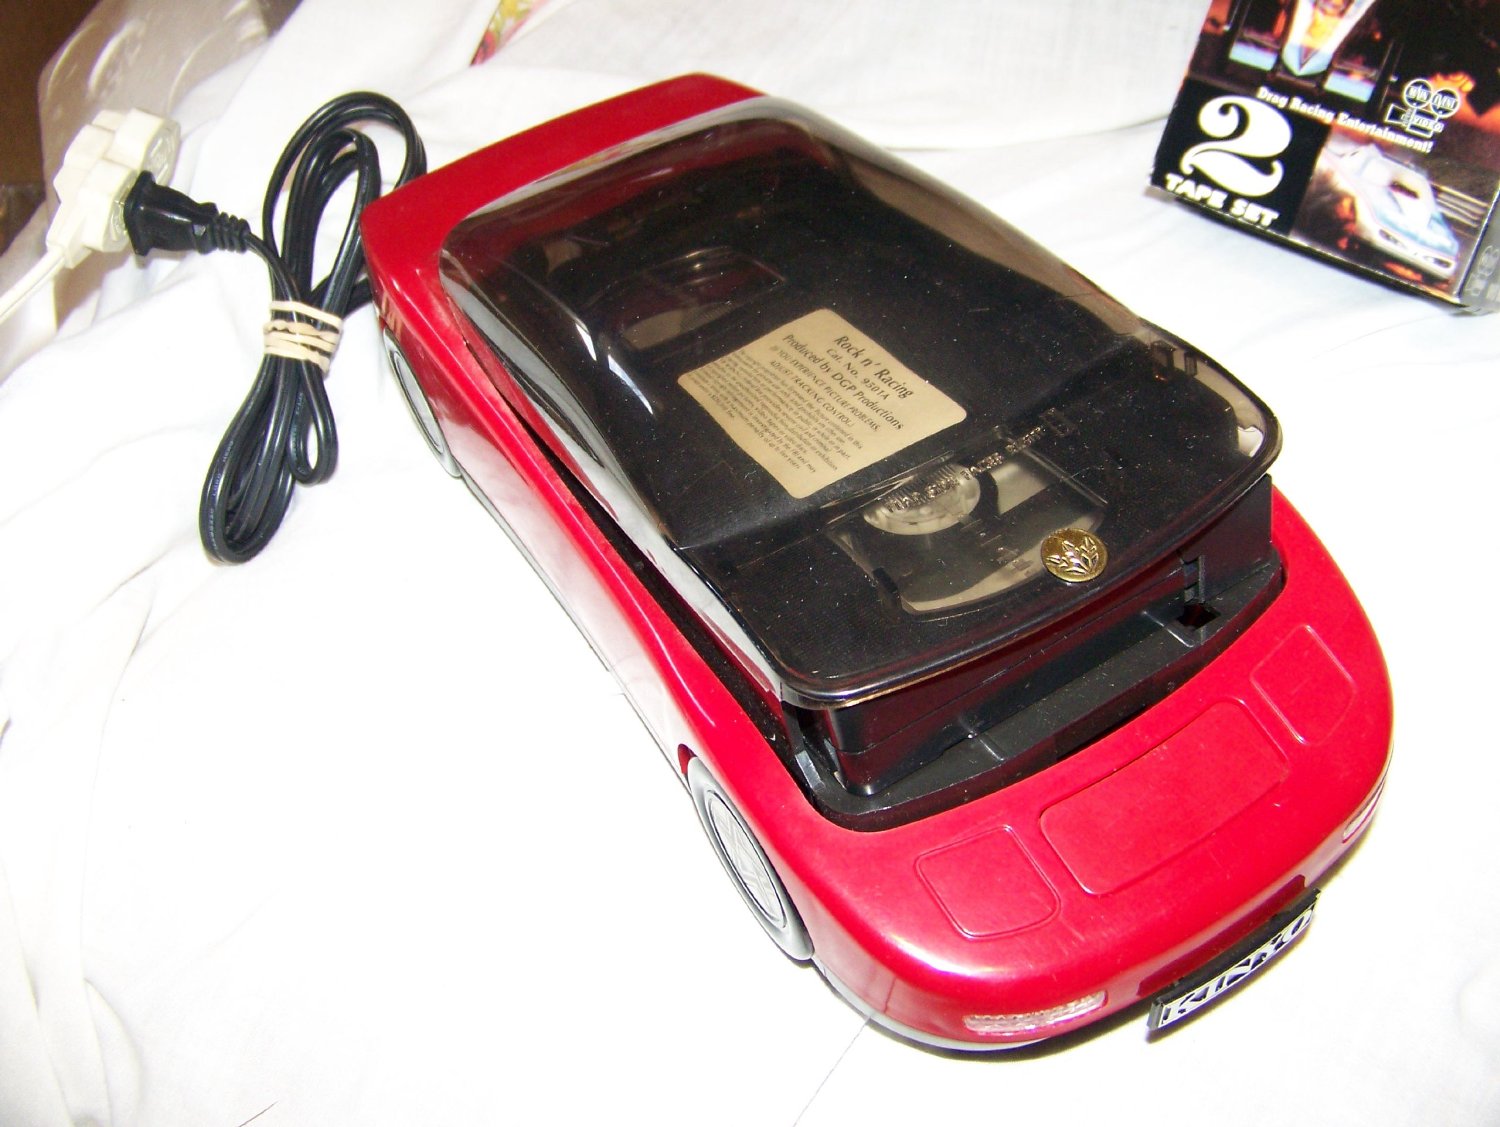 vhs rewinder car - Rock n' Racing Cal No. 95014 Produced by Dgp Productions